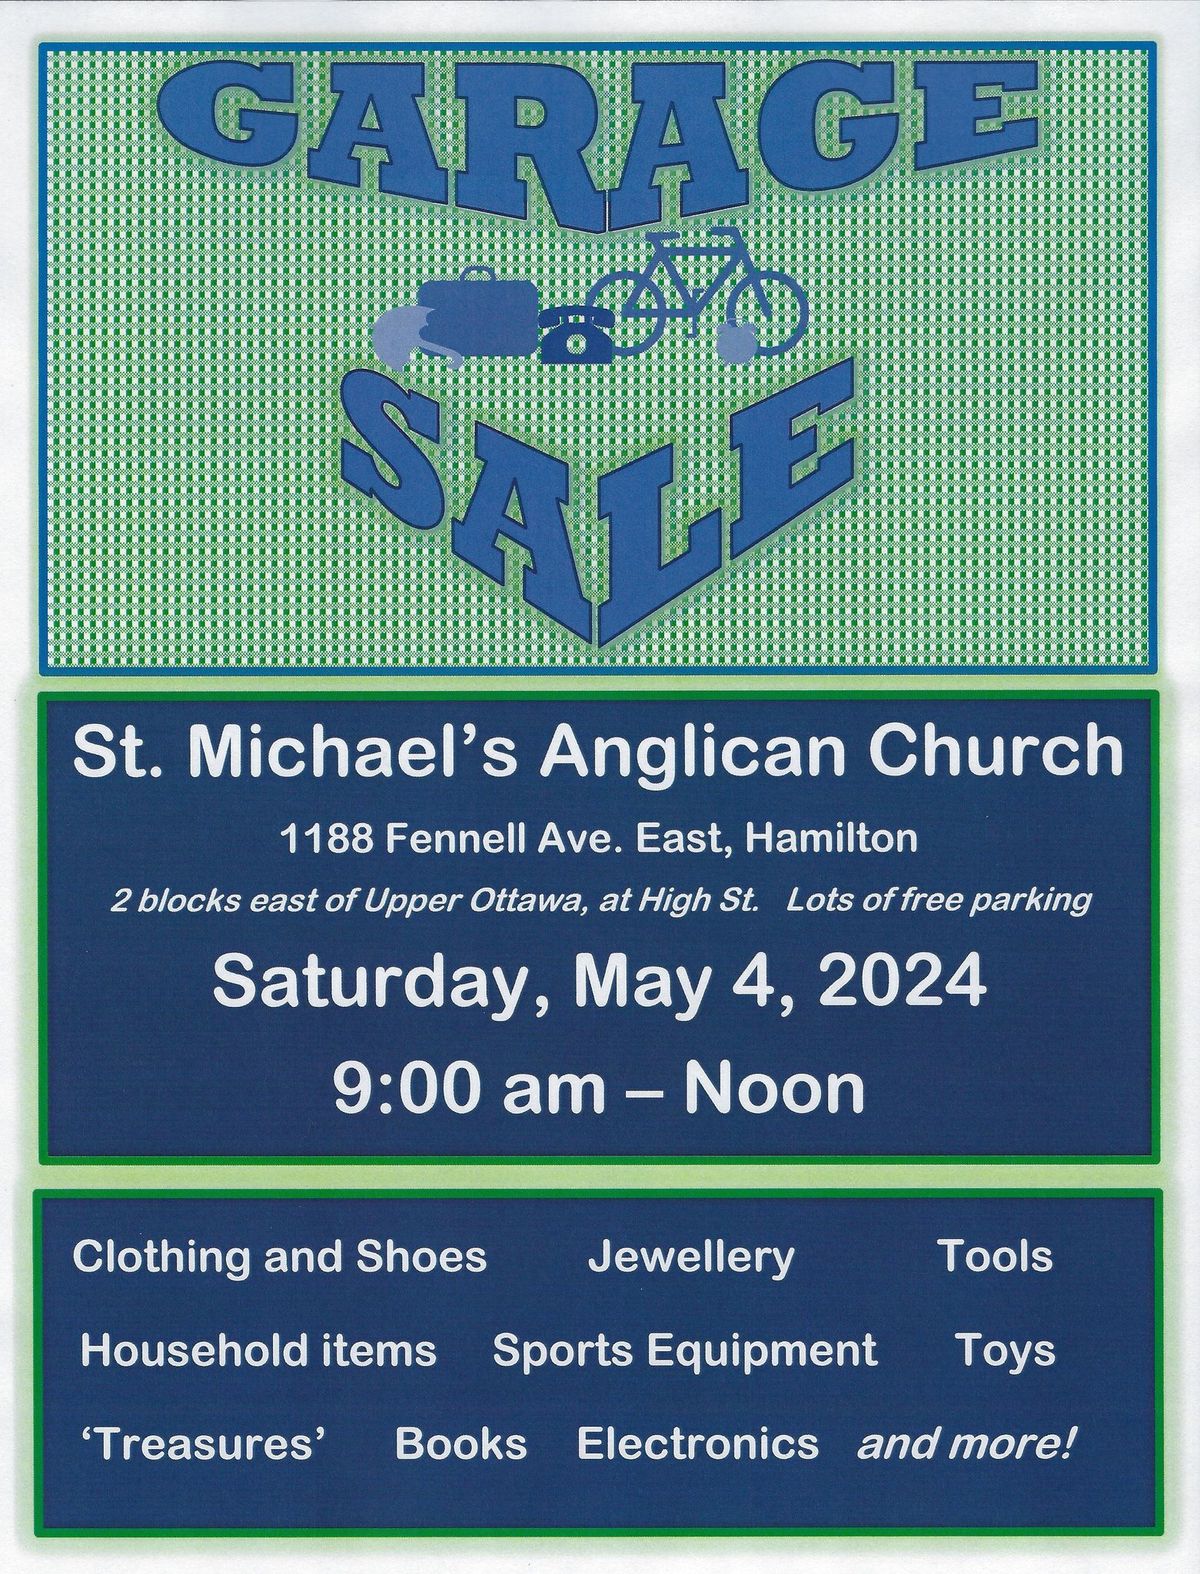 Garage Sale at St. Michael's Anglican Church